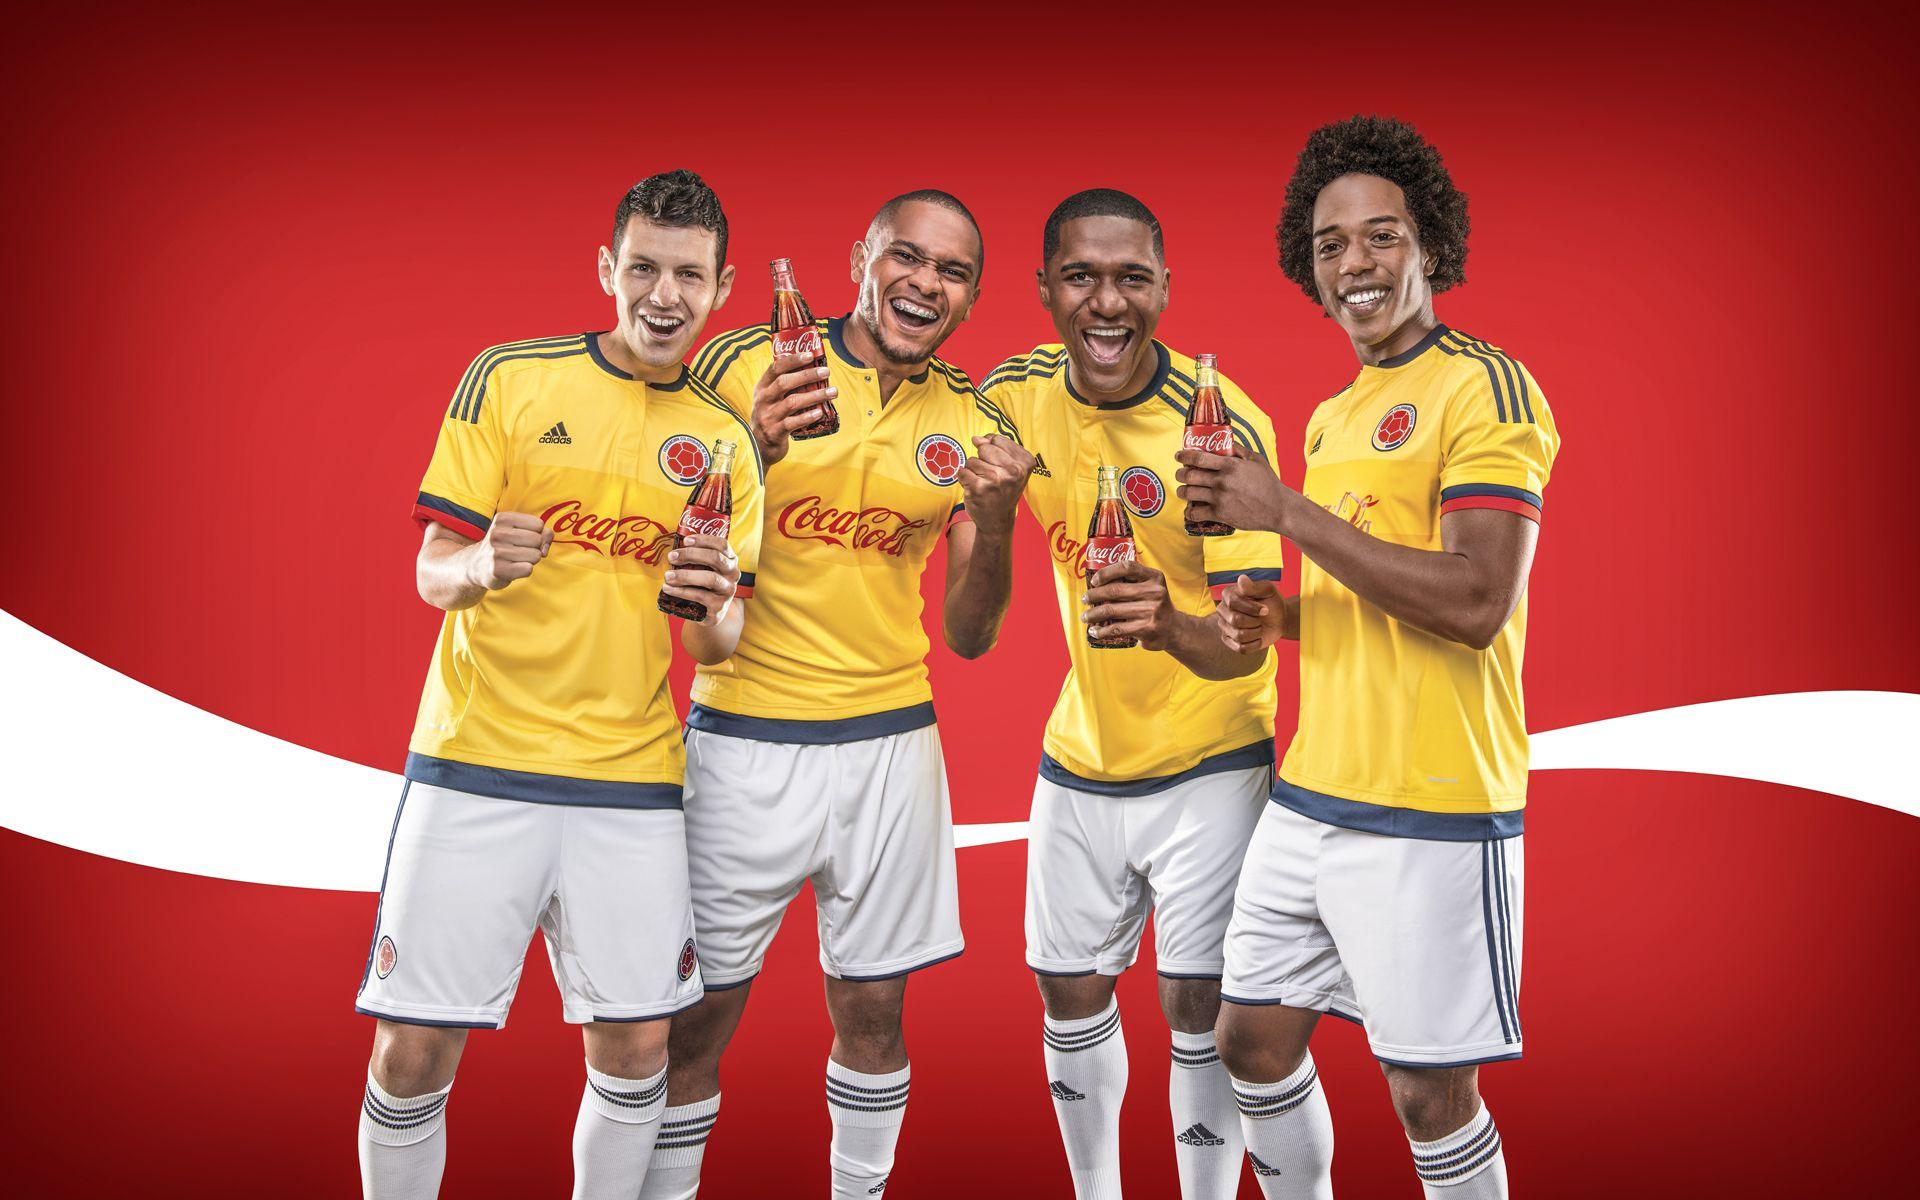 COCA COLA. COLOMBIA NATIONAL FOOTBALL TEAM